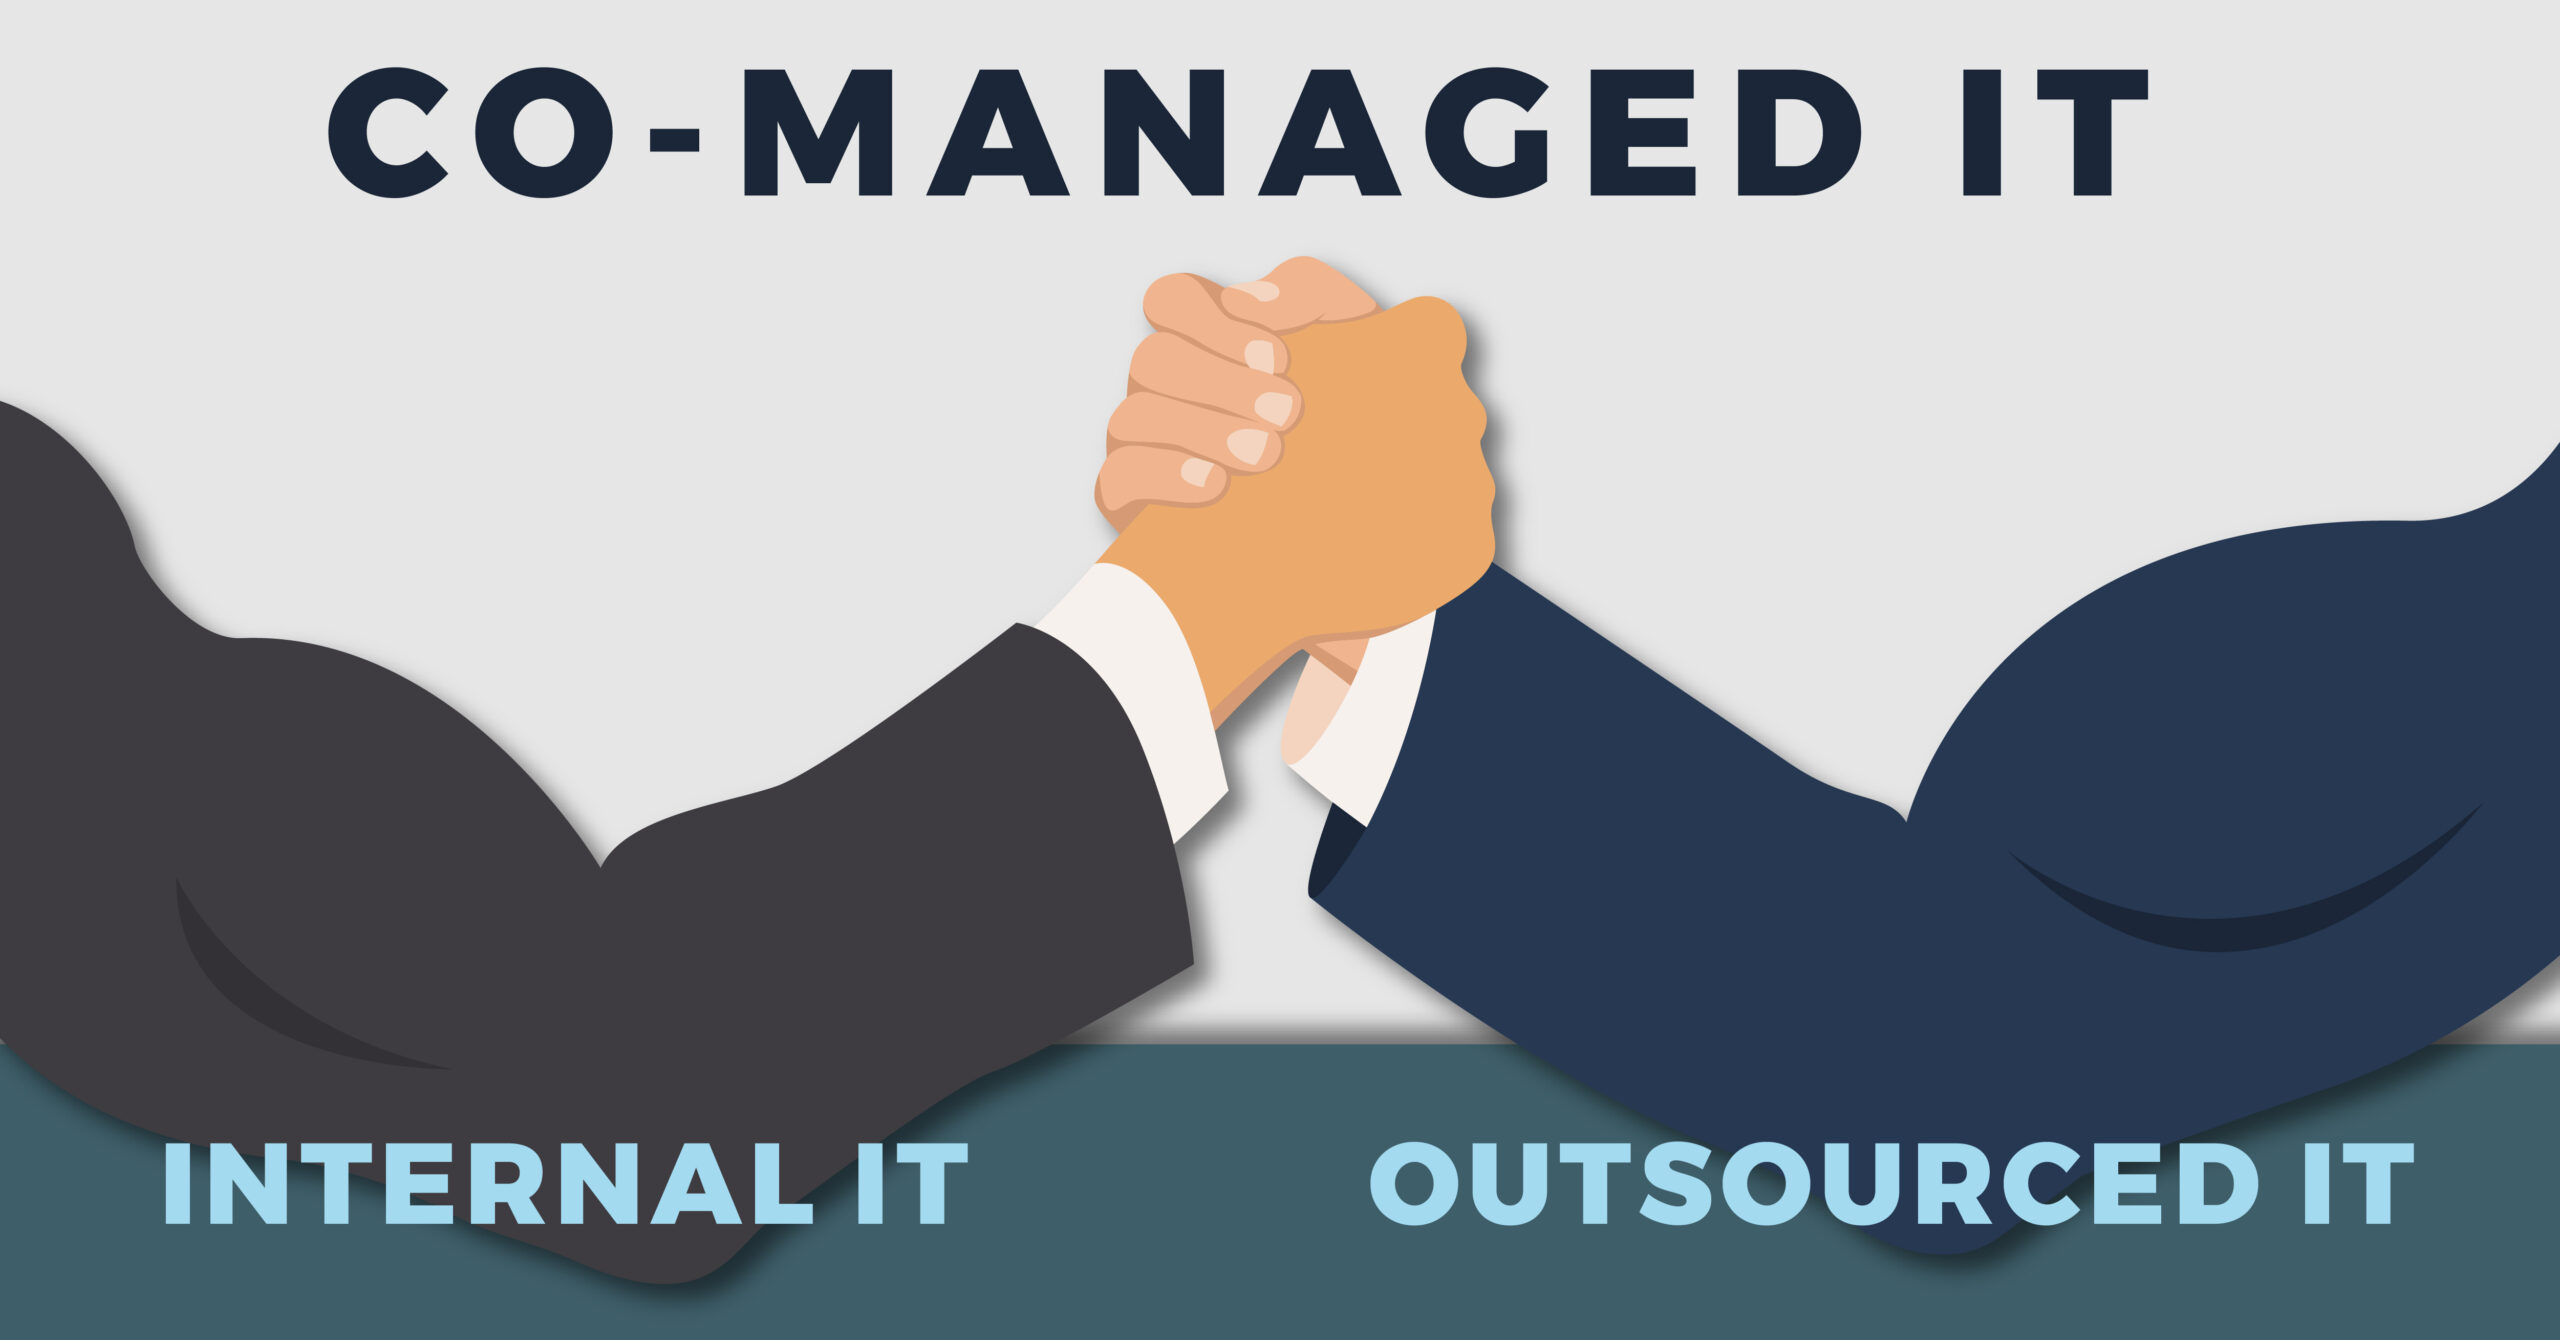 Co-Managed IT image, two men gripping hands, internal IT and outsourced IT